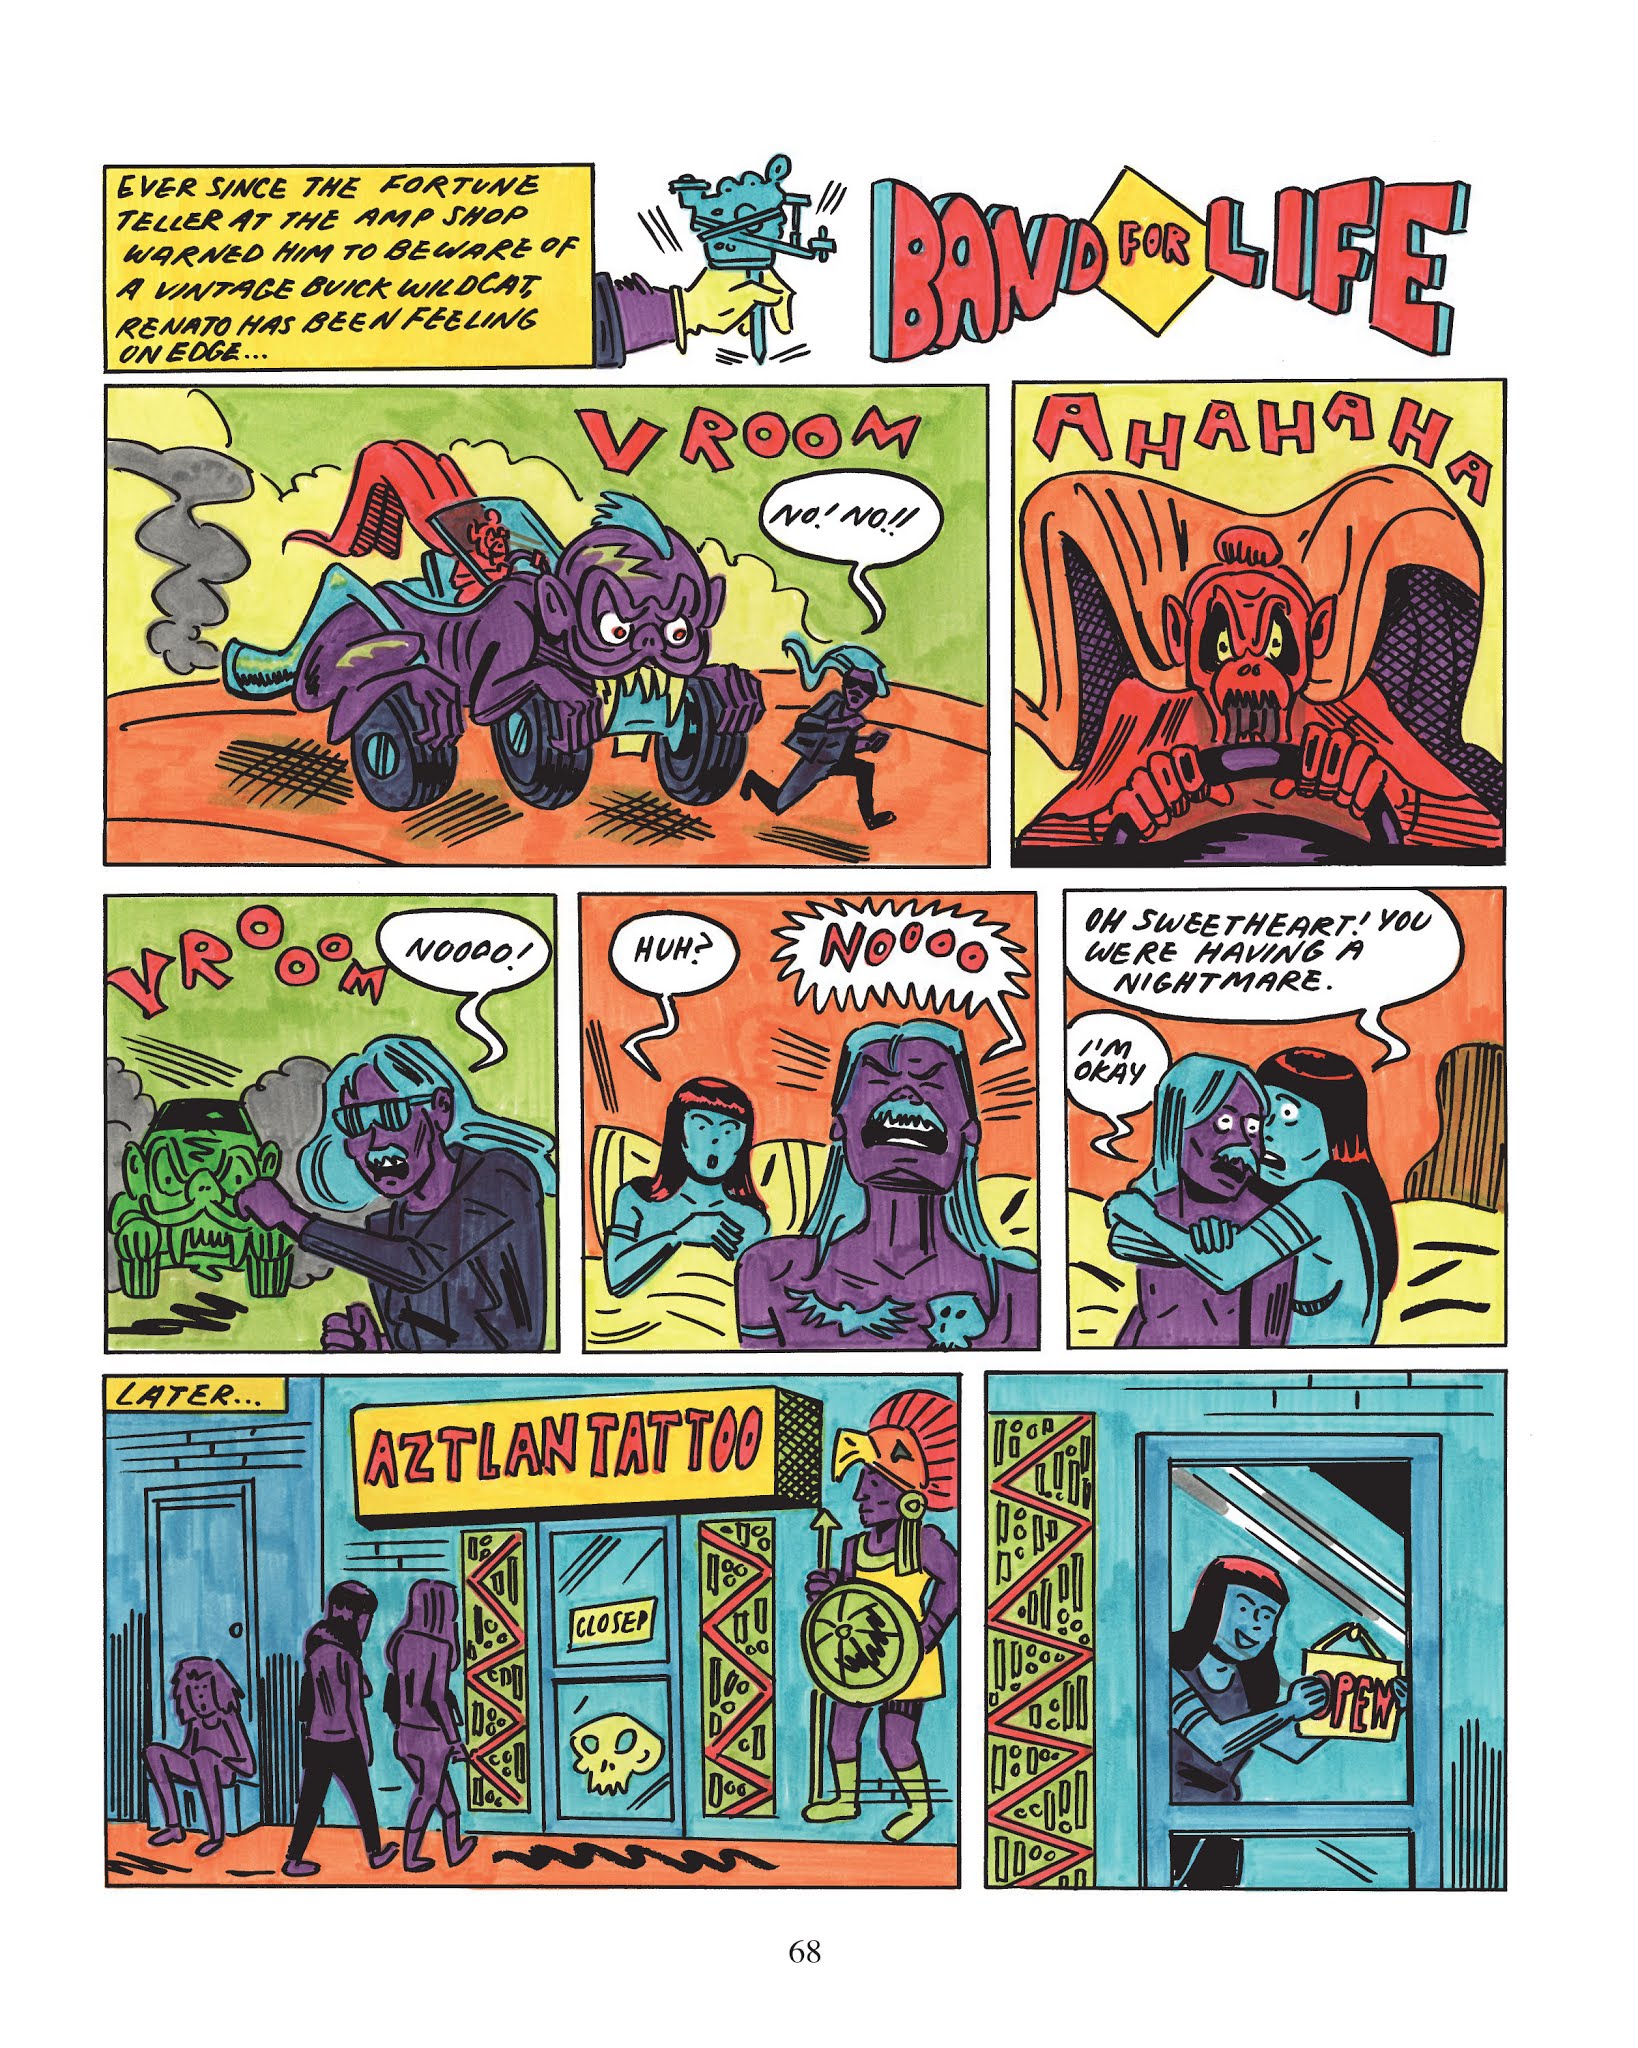 Read online Band for Life comic -  Issue # TPB (Part 1) - 69